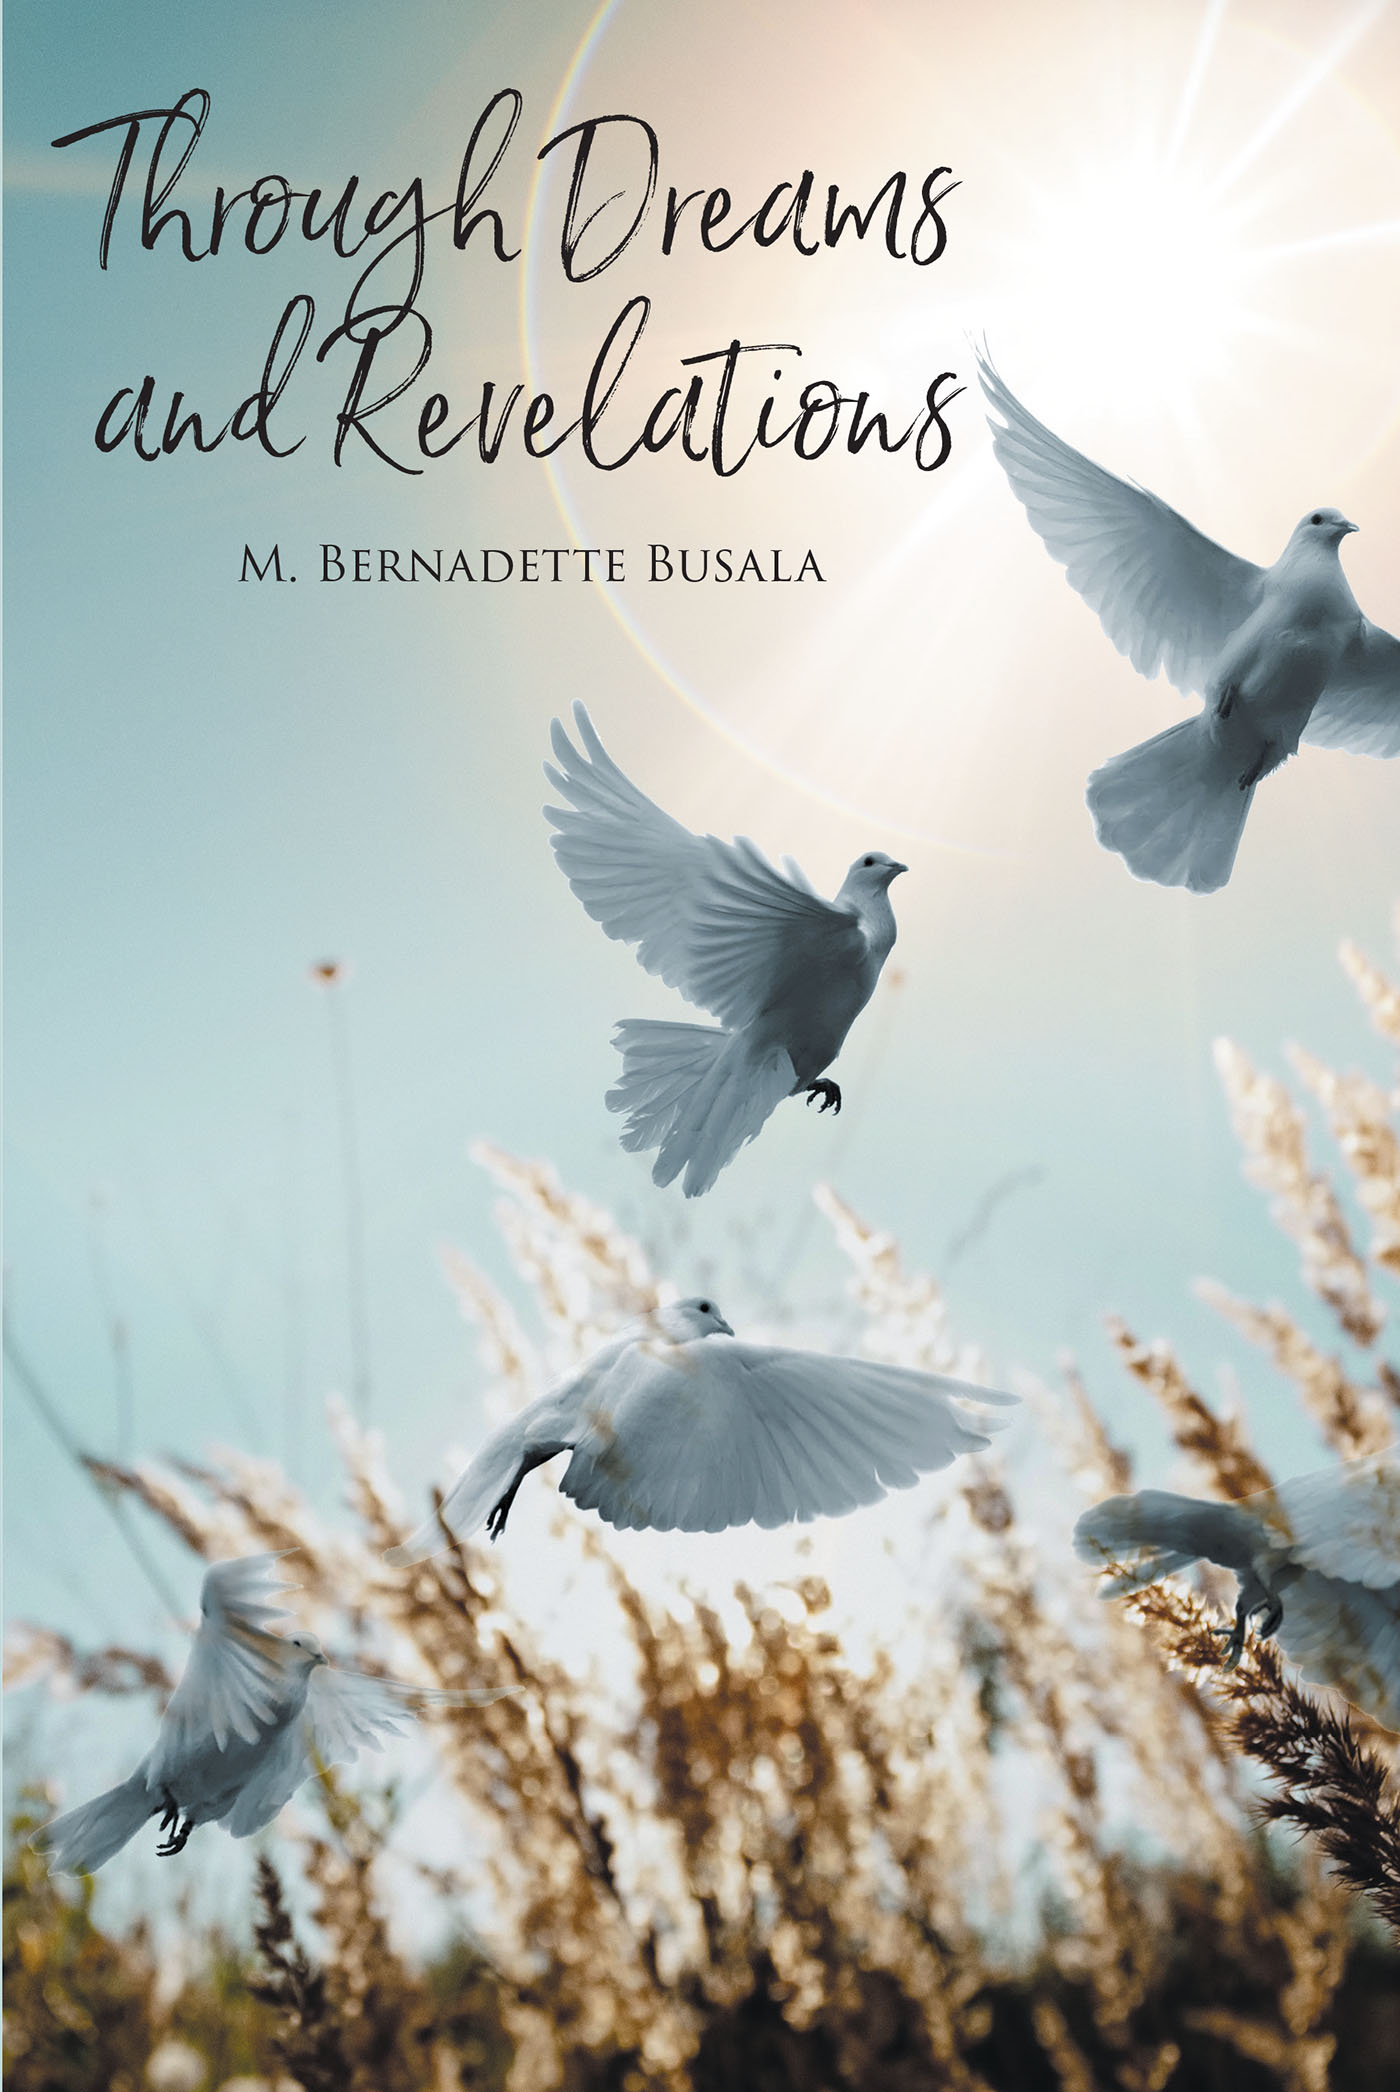 Author M. Bernadette Busala’s New Book, "Through Dreams and Revelations," is a Heartfelt Compilation of Biblical Verses That Reveal Christ's Destined Return and Salvation